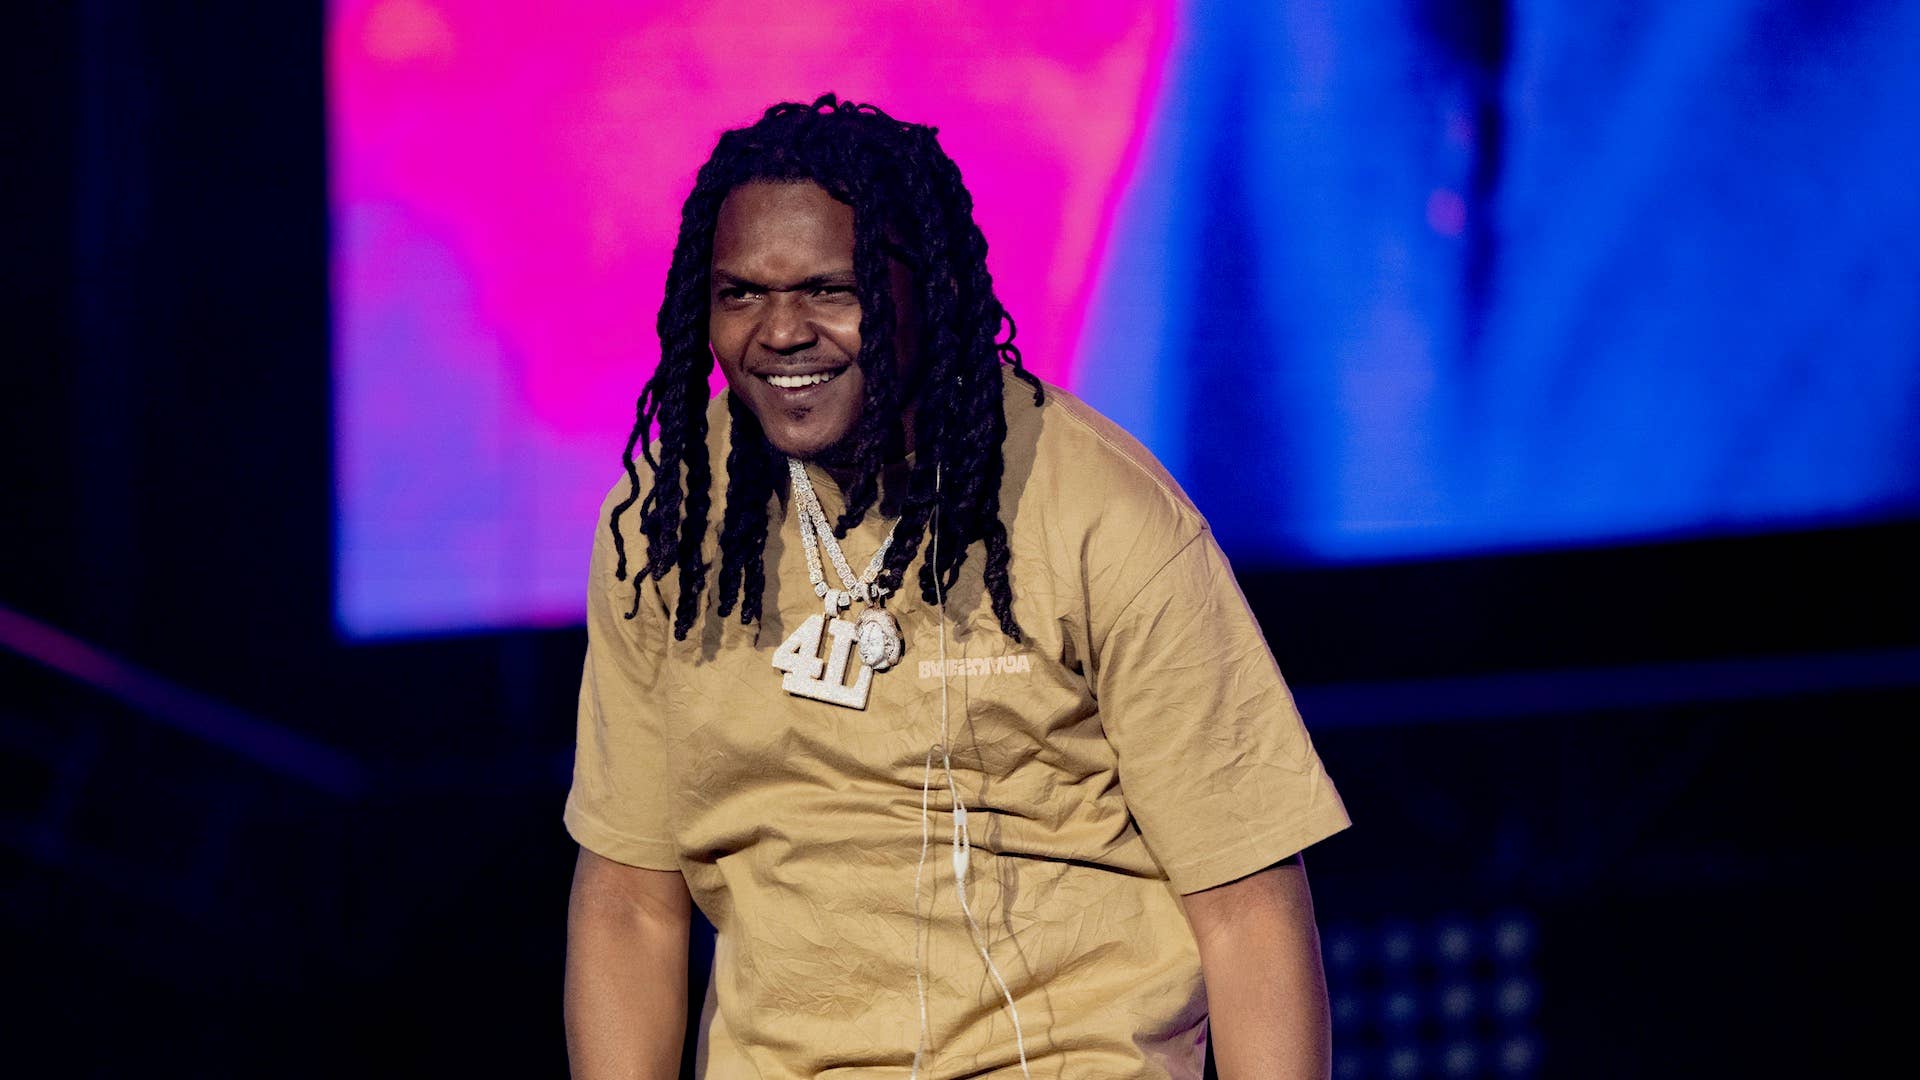 Rapper Young Nudy performs onstage during day 3 of Rolling Loud Los Angeles